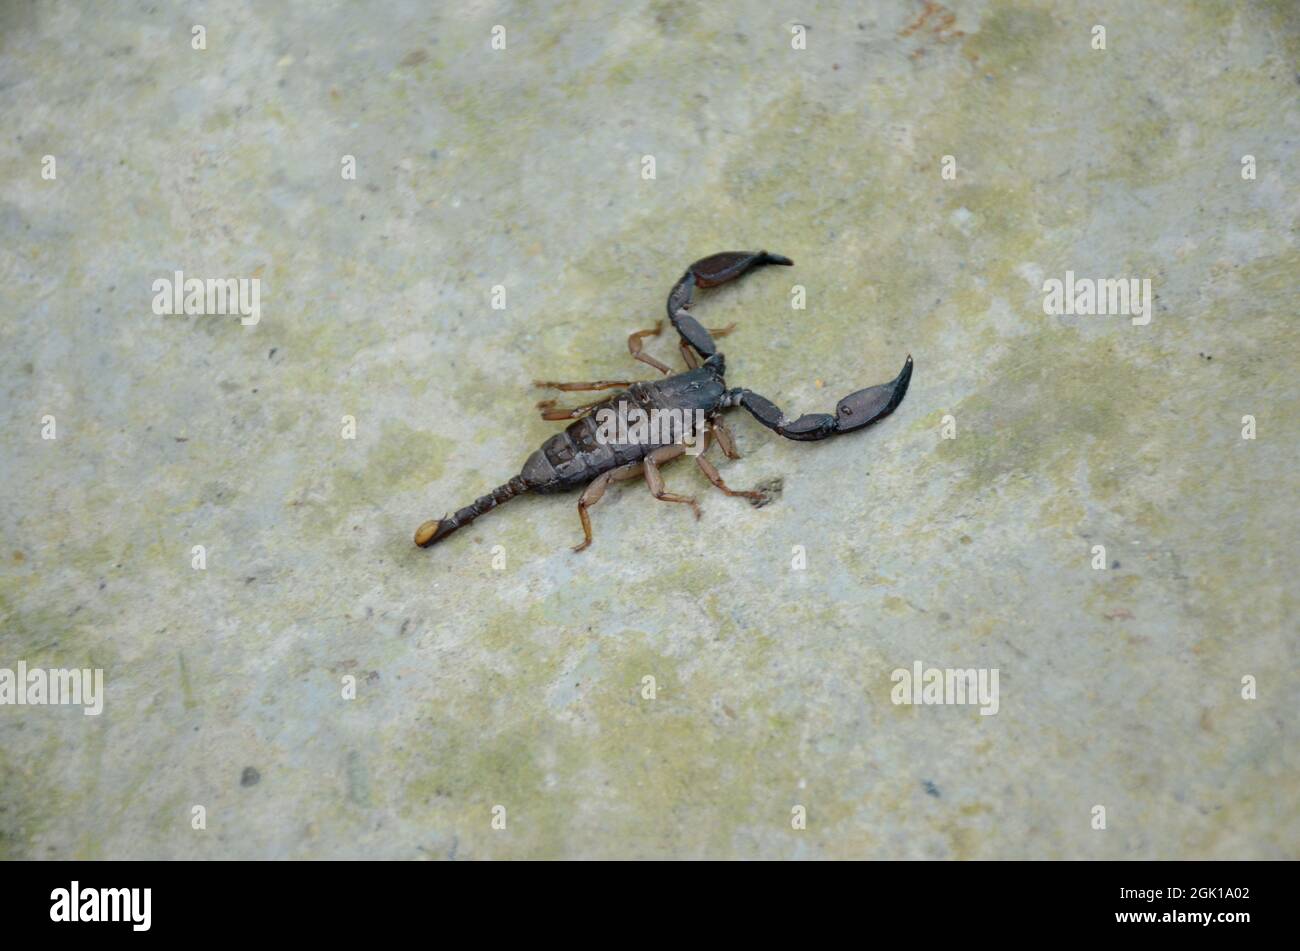 A closeup shot of a brown-black scorpion on a sto Stock Photo